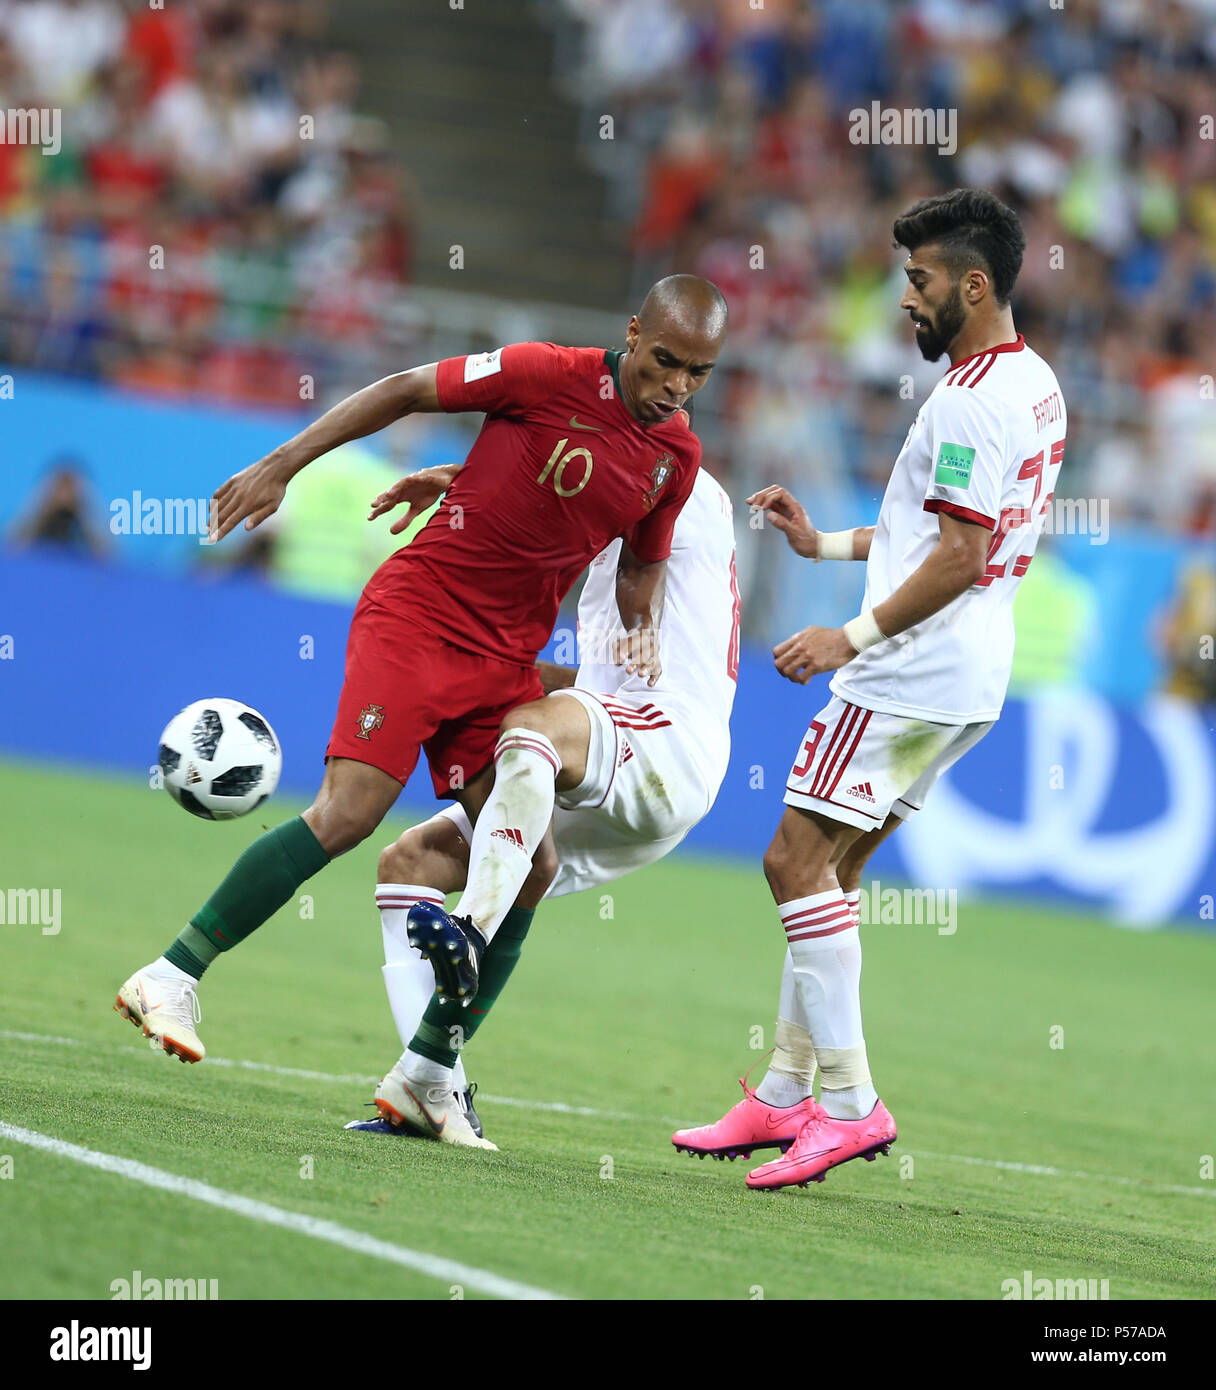 Mordovia Arena, Saransk, Russia,June 25, 2018. JOAVO MARIO of the Portugal Team fierless fighting with the Iranian Opponents.  Portugal survives late surge to advance with 1-1 draw with Iran.  SeshadriSUKUMAR Credit: Seshadri SUKUMAR/Alamy Live News Stock Photo